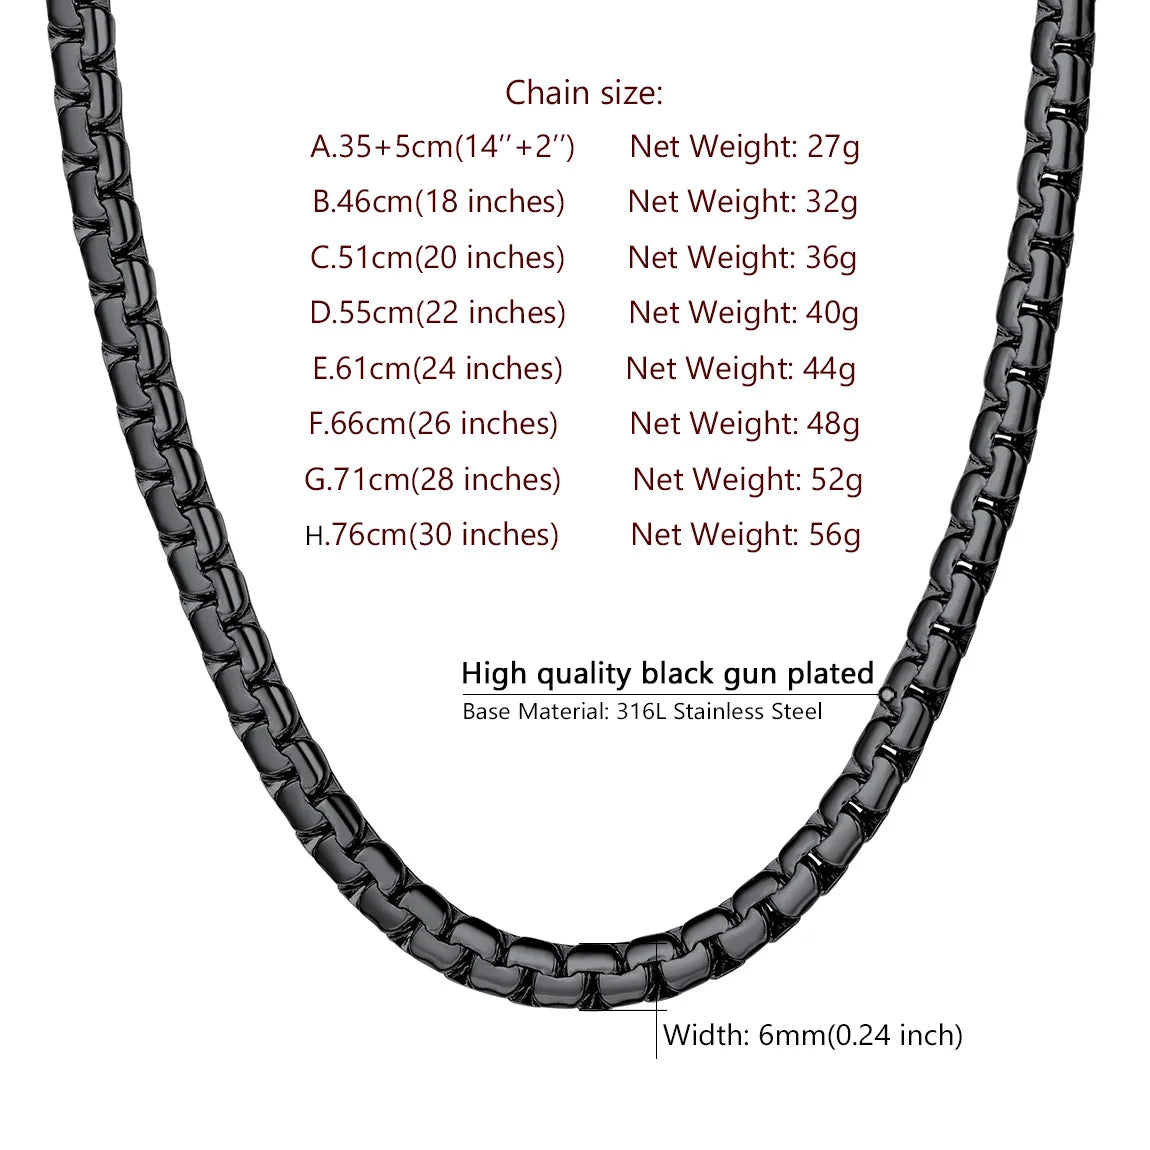 Black Flat Box Chain Male Necklace 14-30 Inch 4/6mm Hip Hop Jewelry